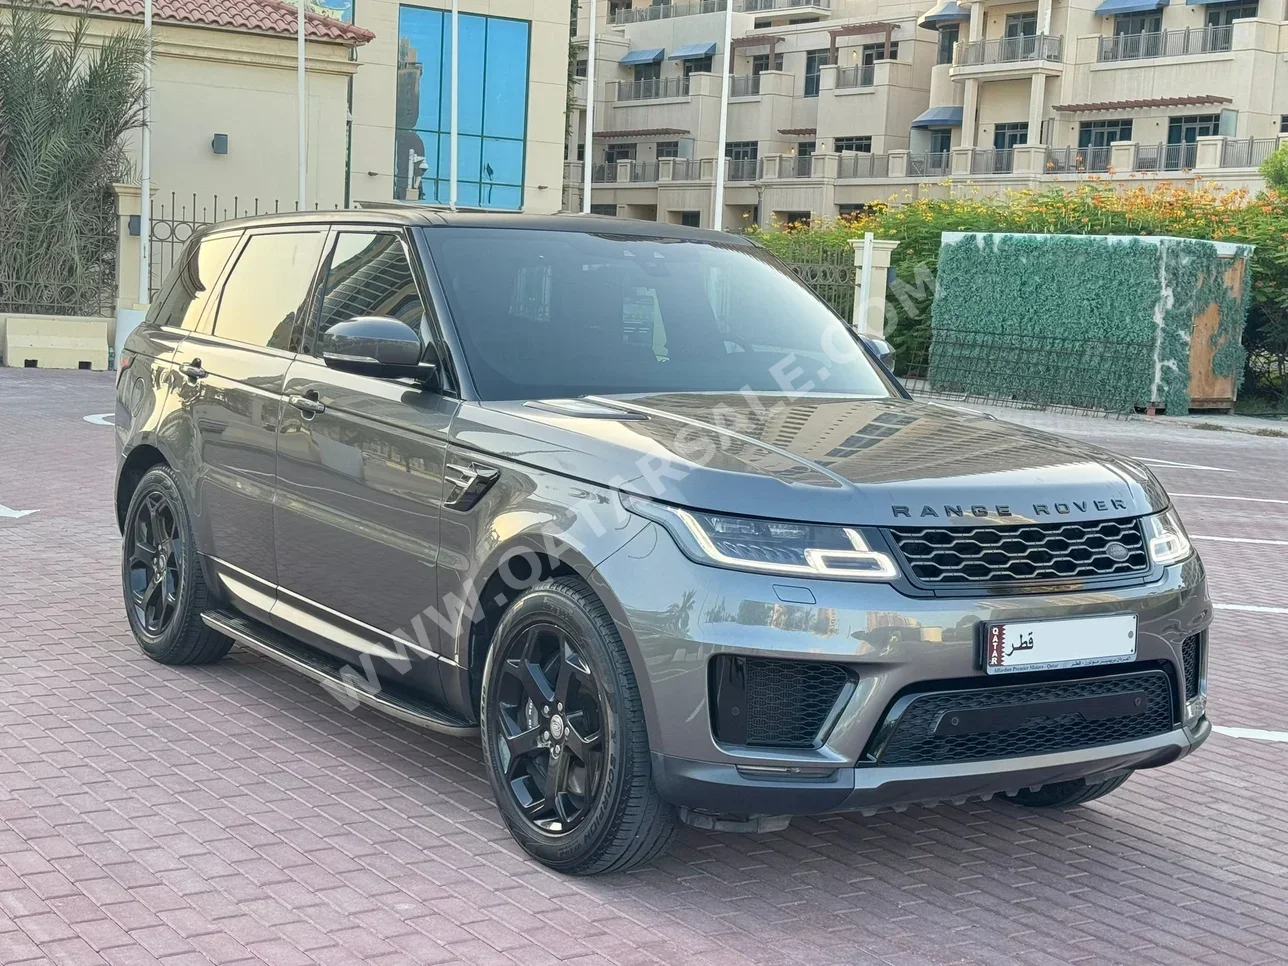 Land Rover  Range Rover  Sport Super charged  2018  Automatic  79,500 Km  6 Cylinder  Four Wheel Drive (4WD)  SUV  Gray